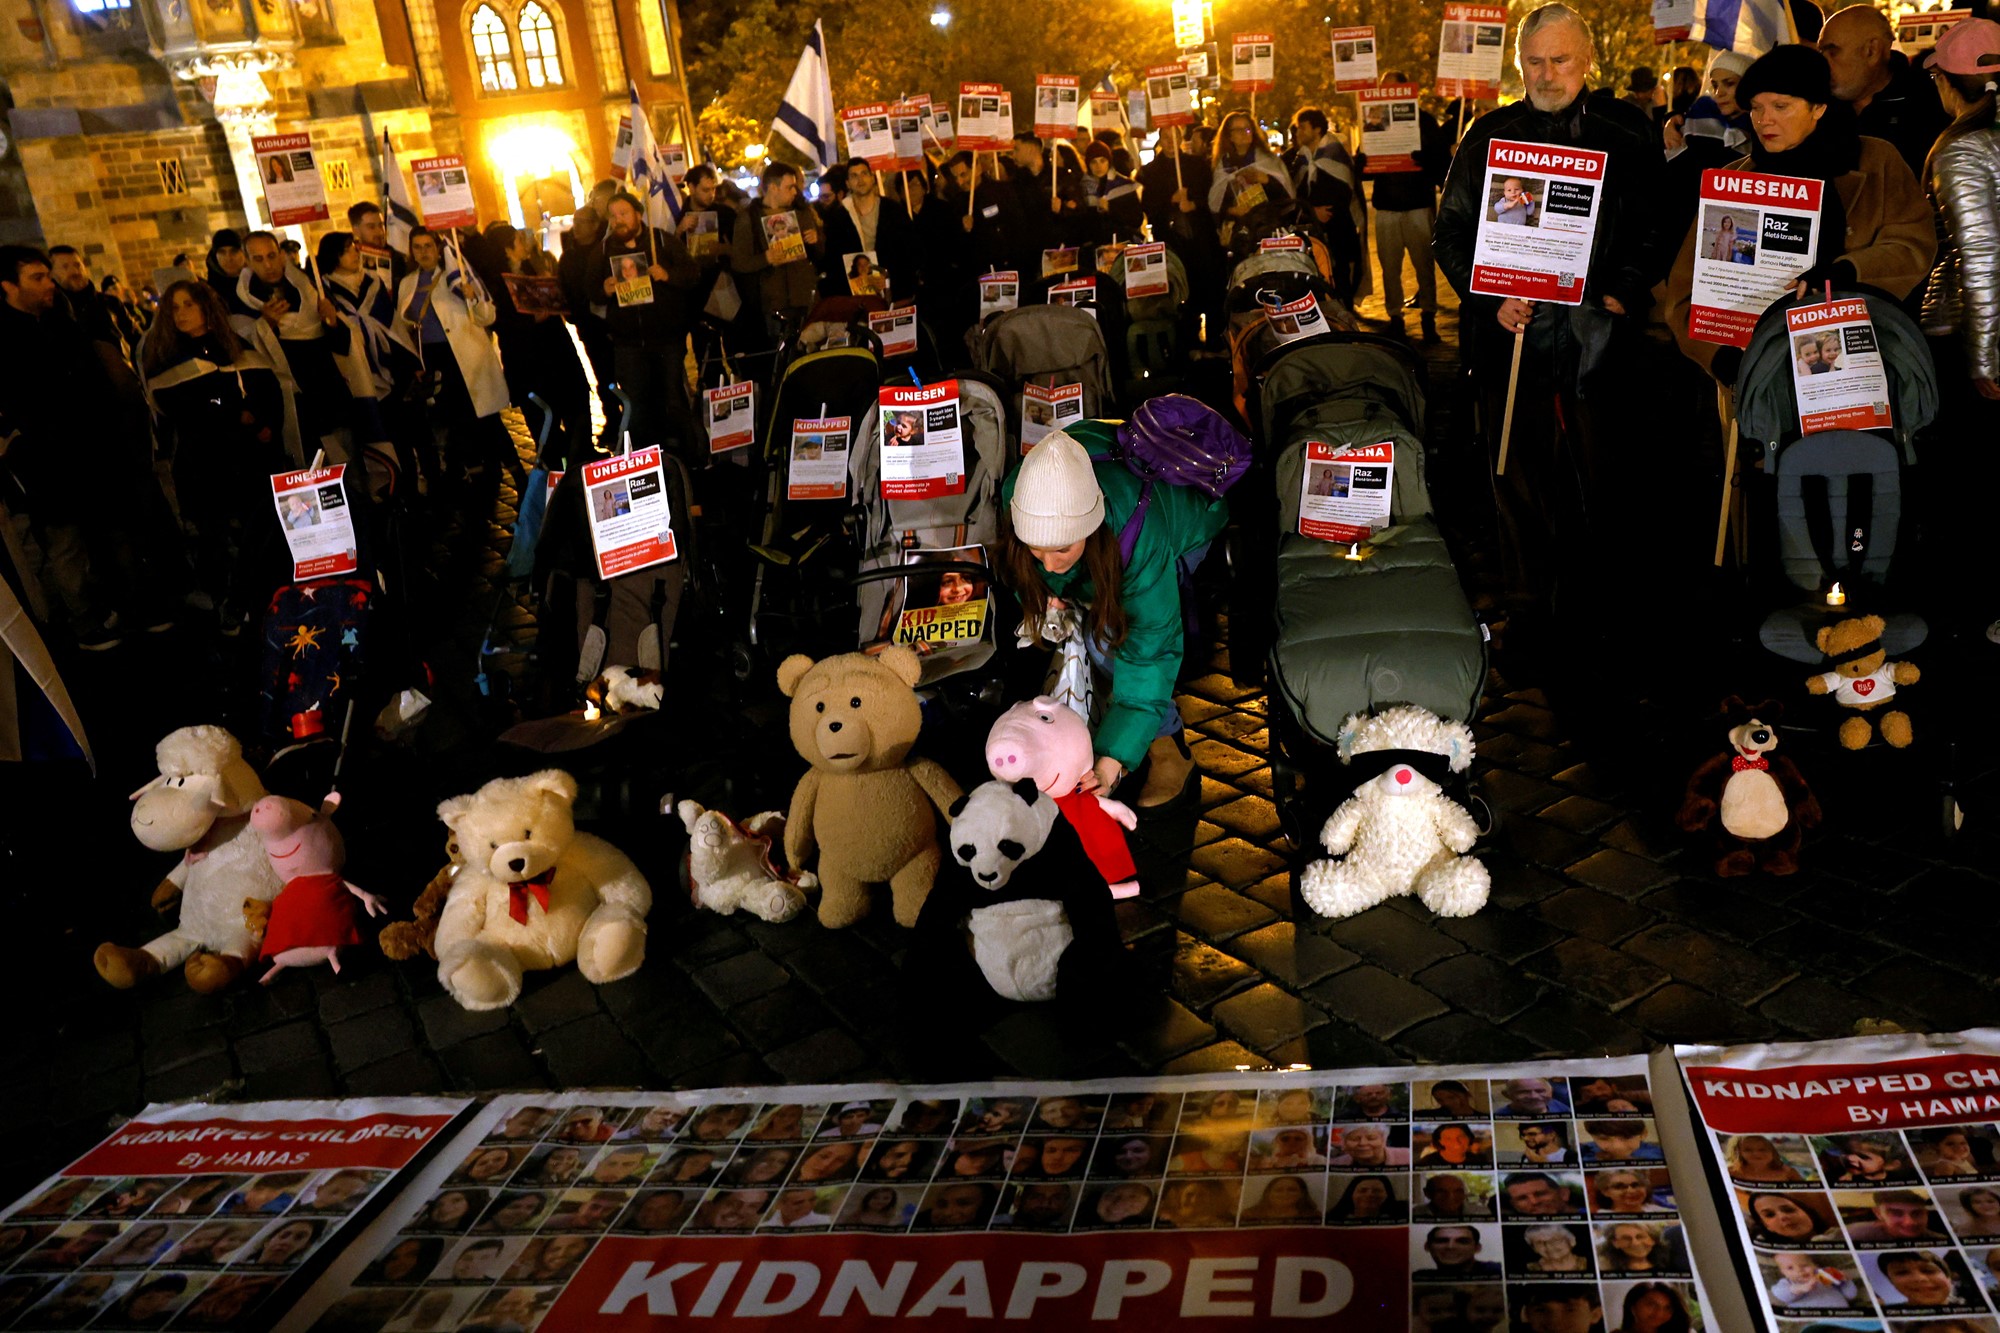 a group of women chant and hold signs in the dark and cold